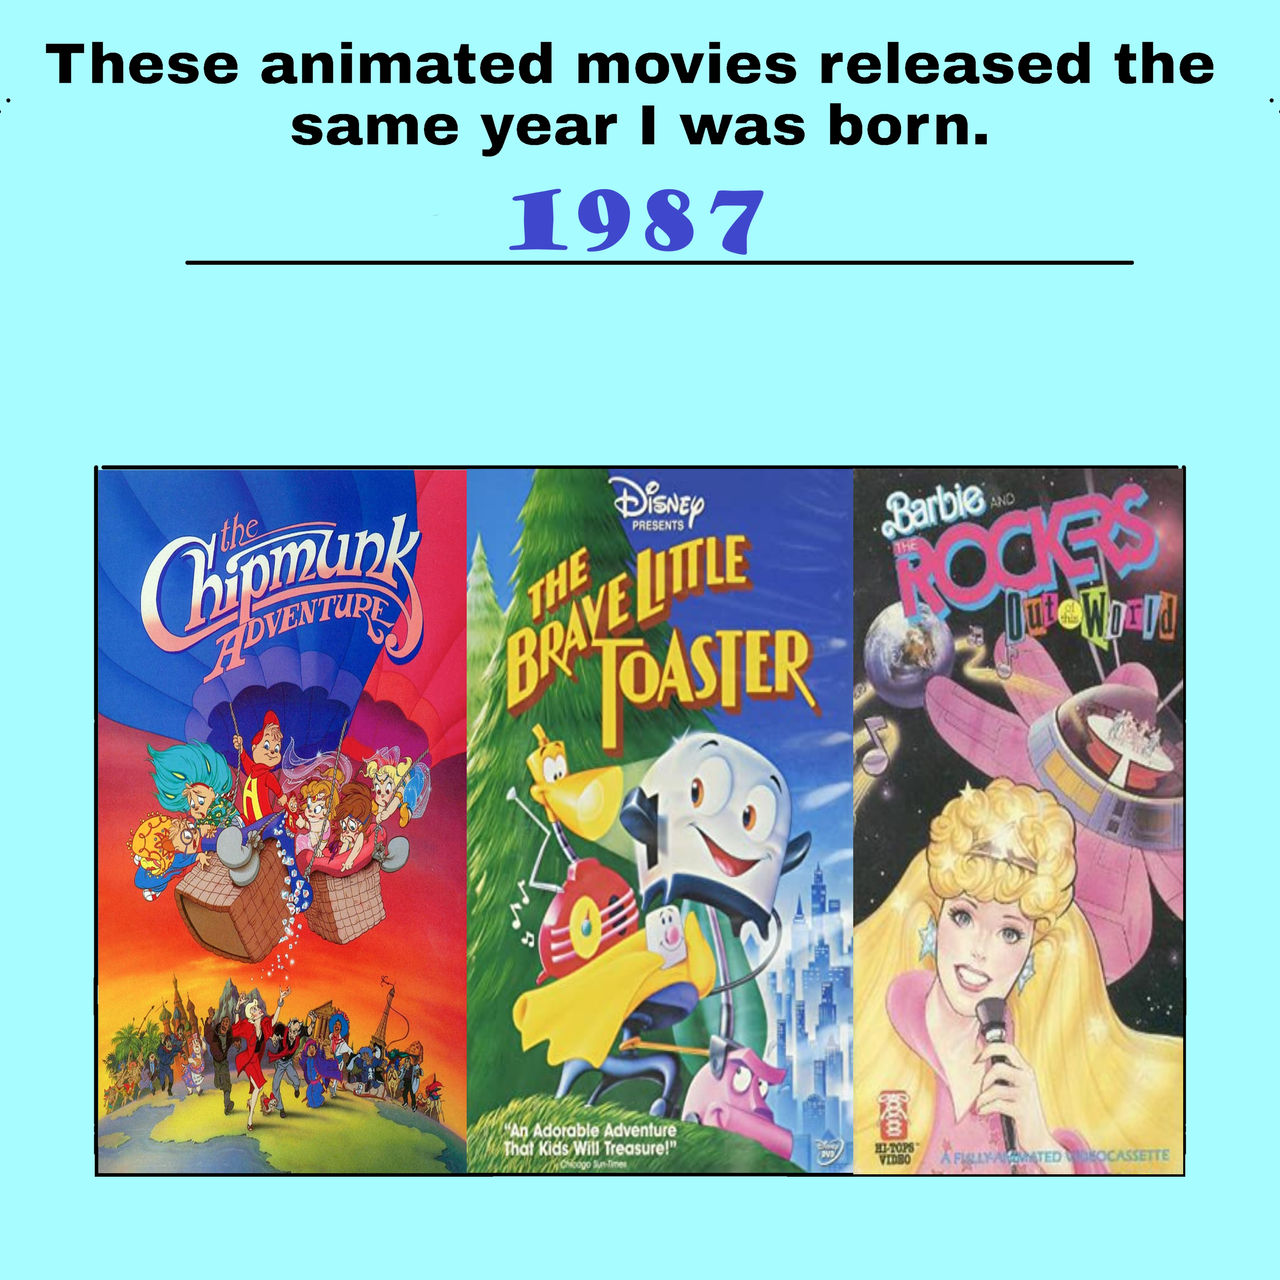 Animated Movies released when I was born (1987) by ThomasAnime on DeviantArt